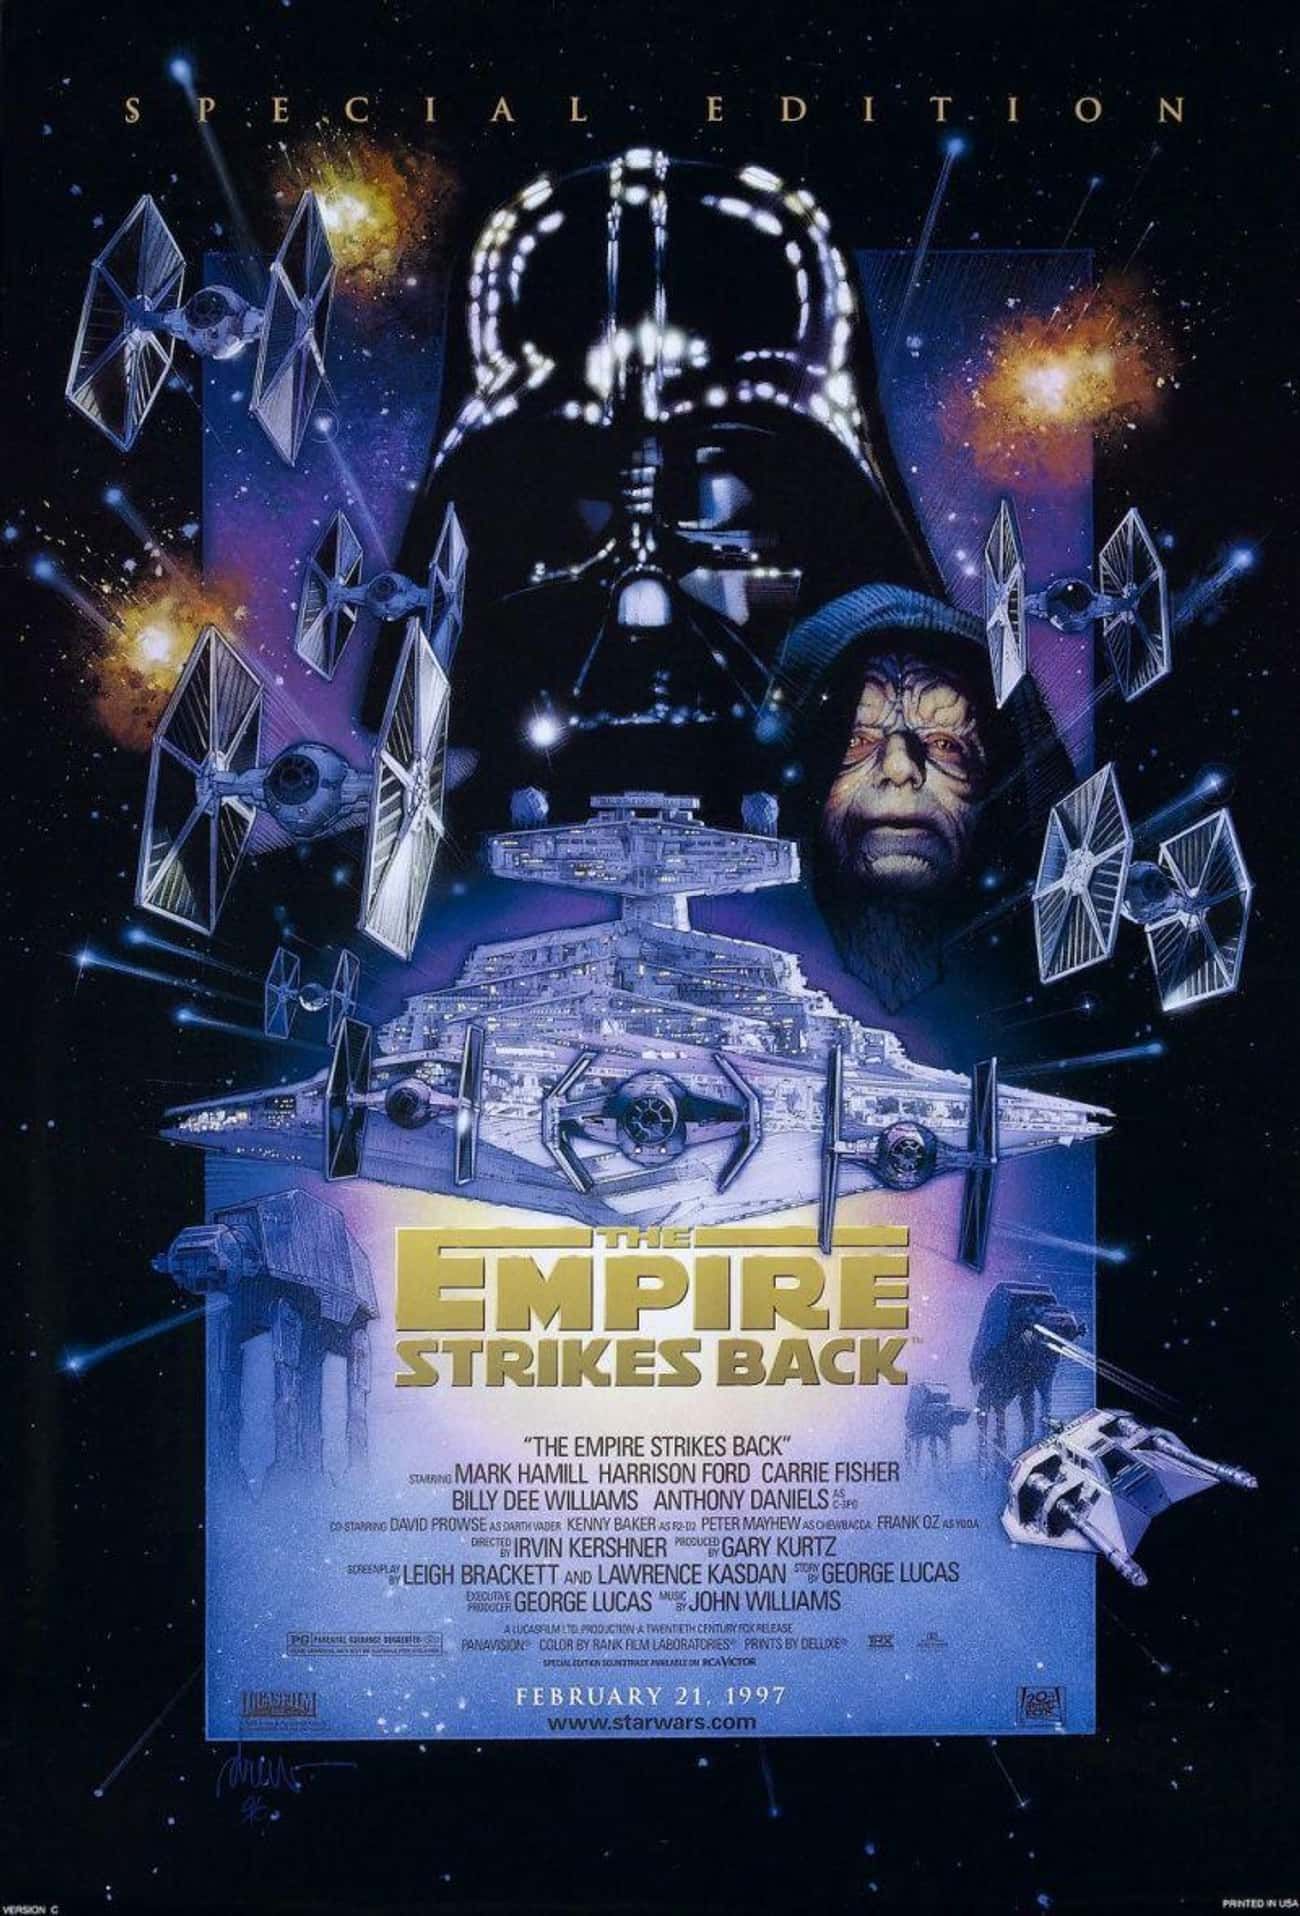 The Empire Strikes Back special edition poster